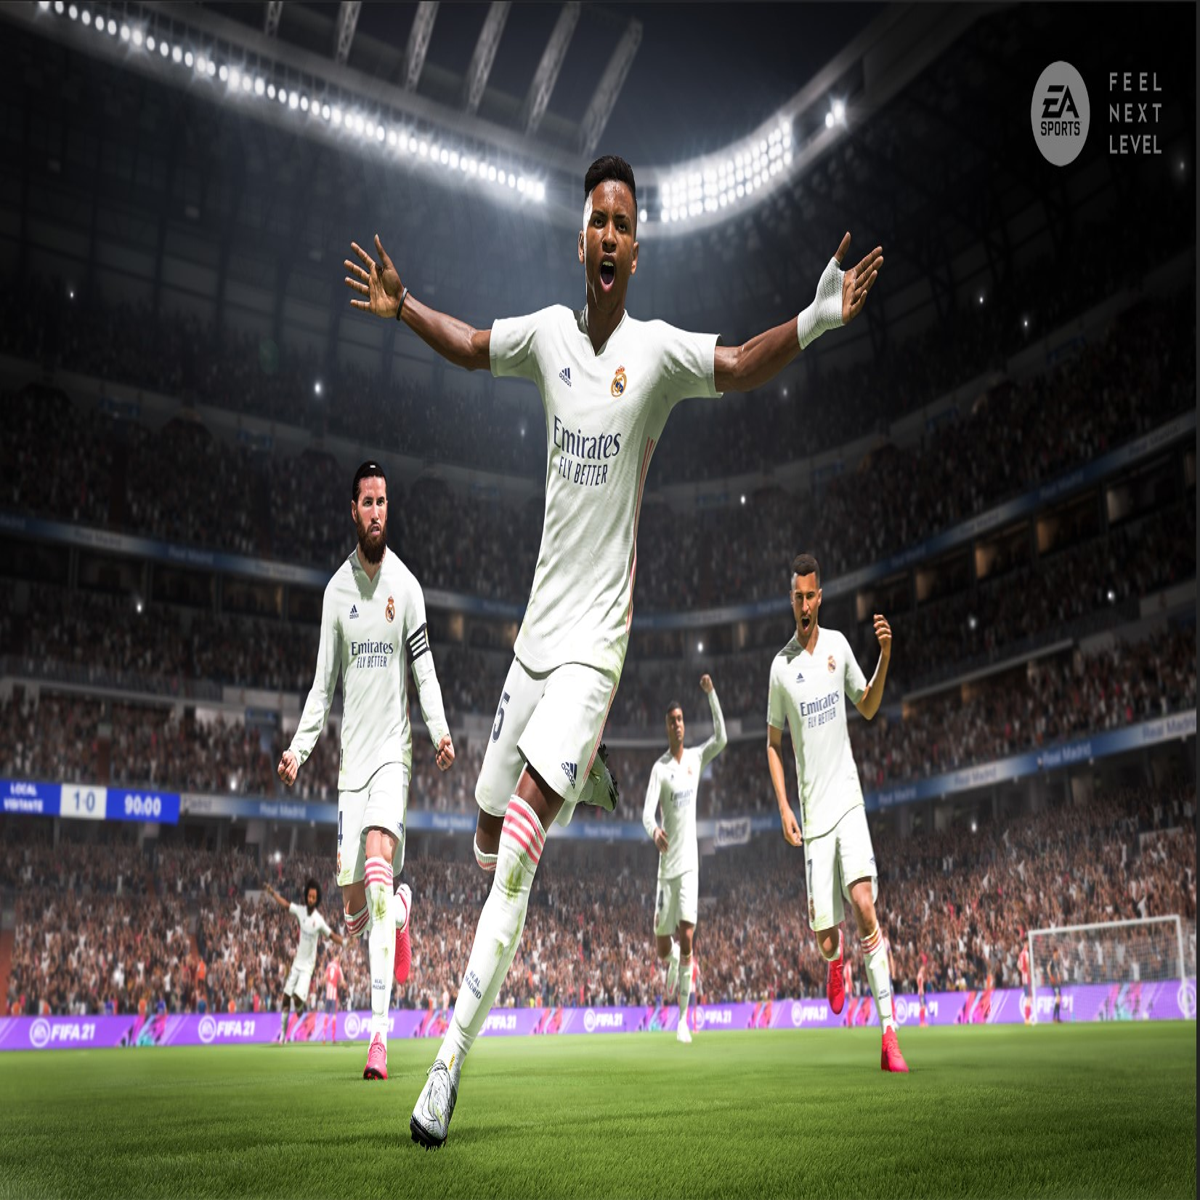 Add FIFA 2021 to your Library on Steam with EA Play 